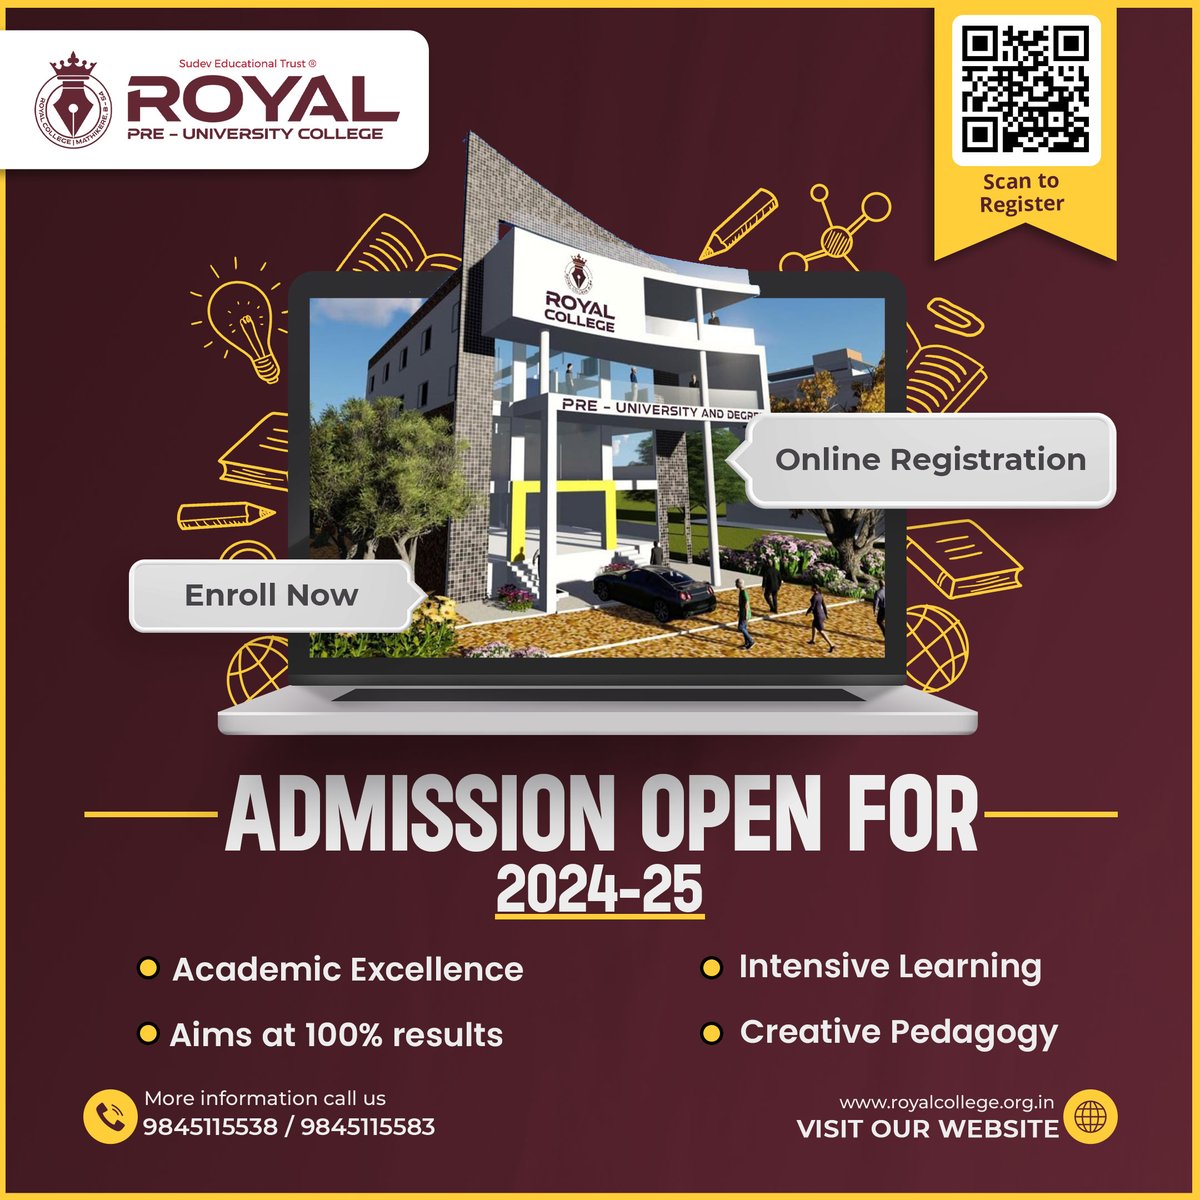 Unlock your potential with Royal Pre-University College. Experience academic excellence and personalized learning. Secure your place for the 2024-25 academic year through online registration. 

#Royal #college #AcademicExcellence #RoyalExperience #AdmissionsOpen